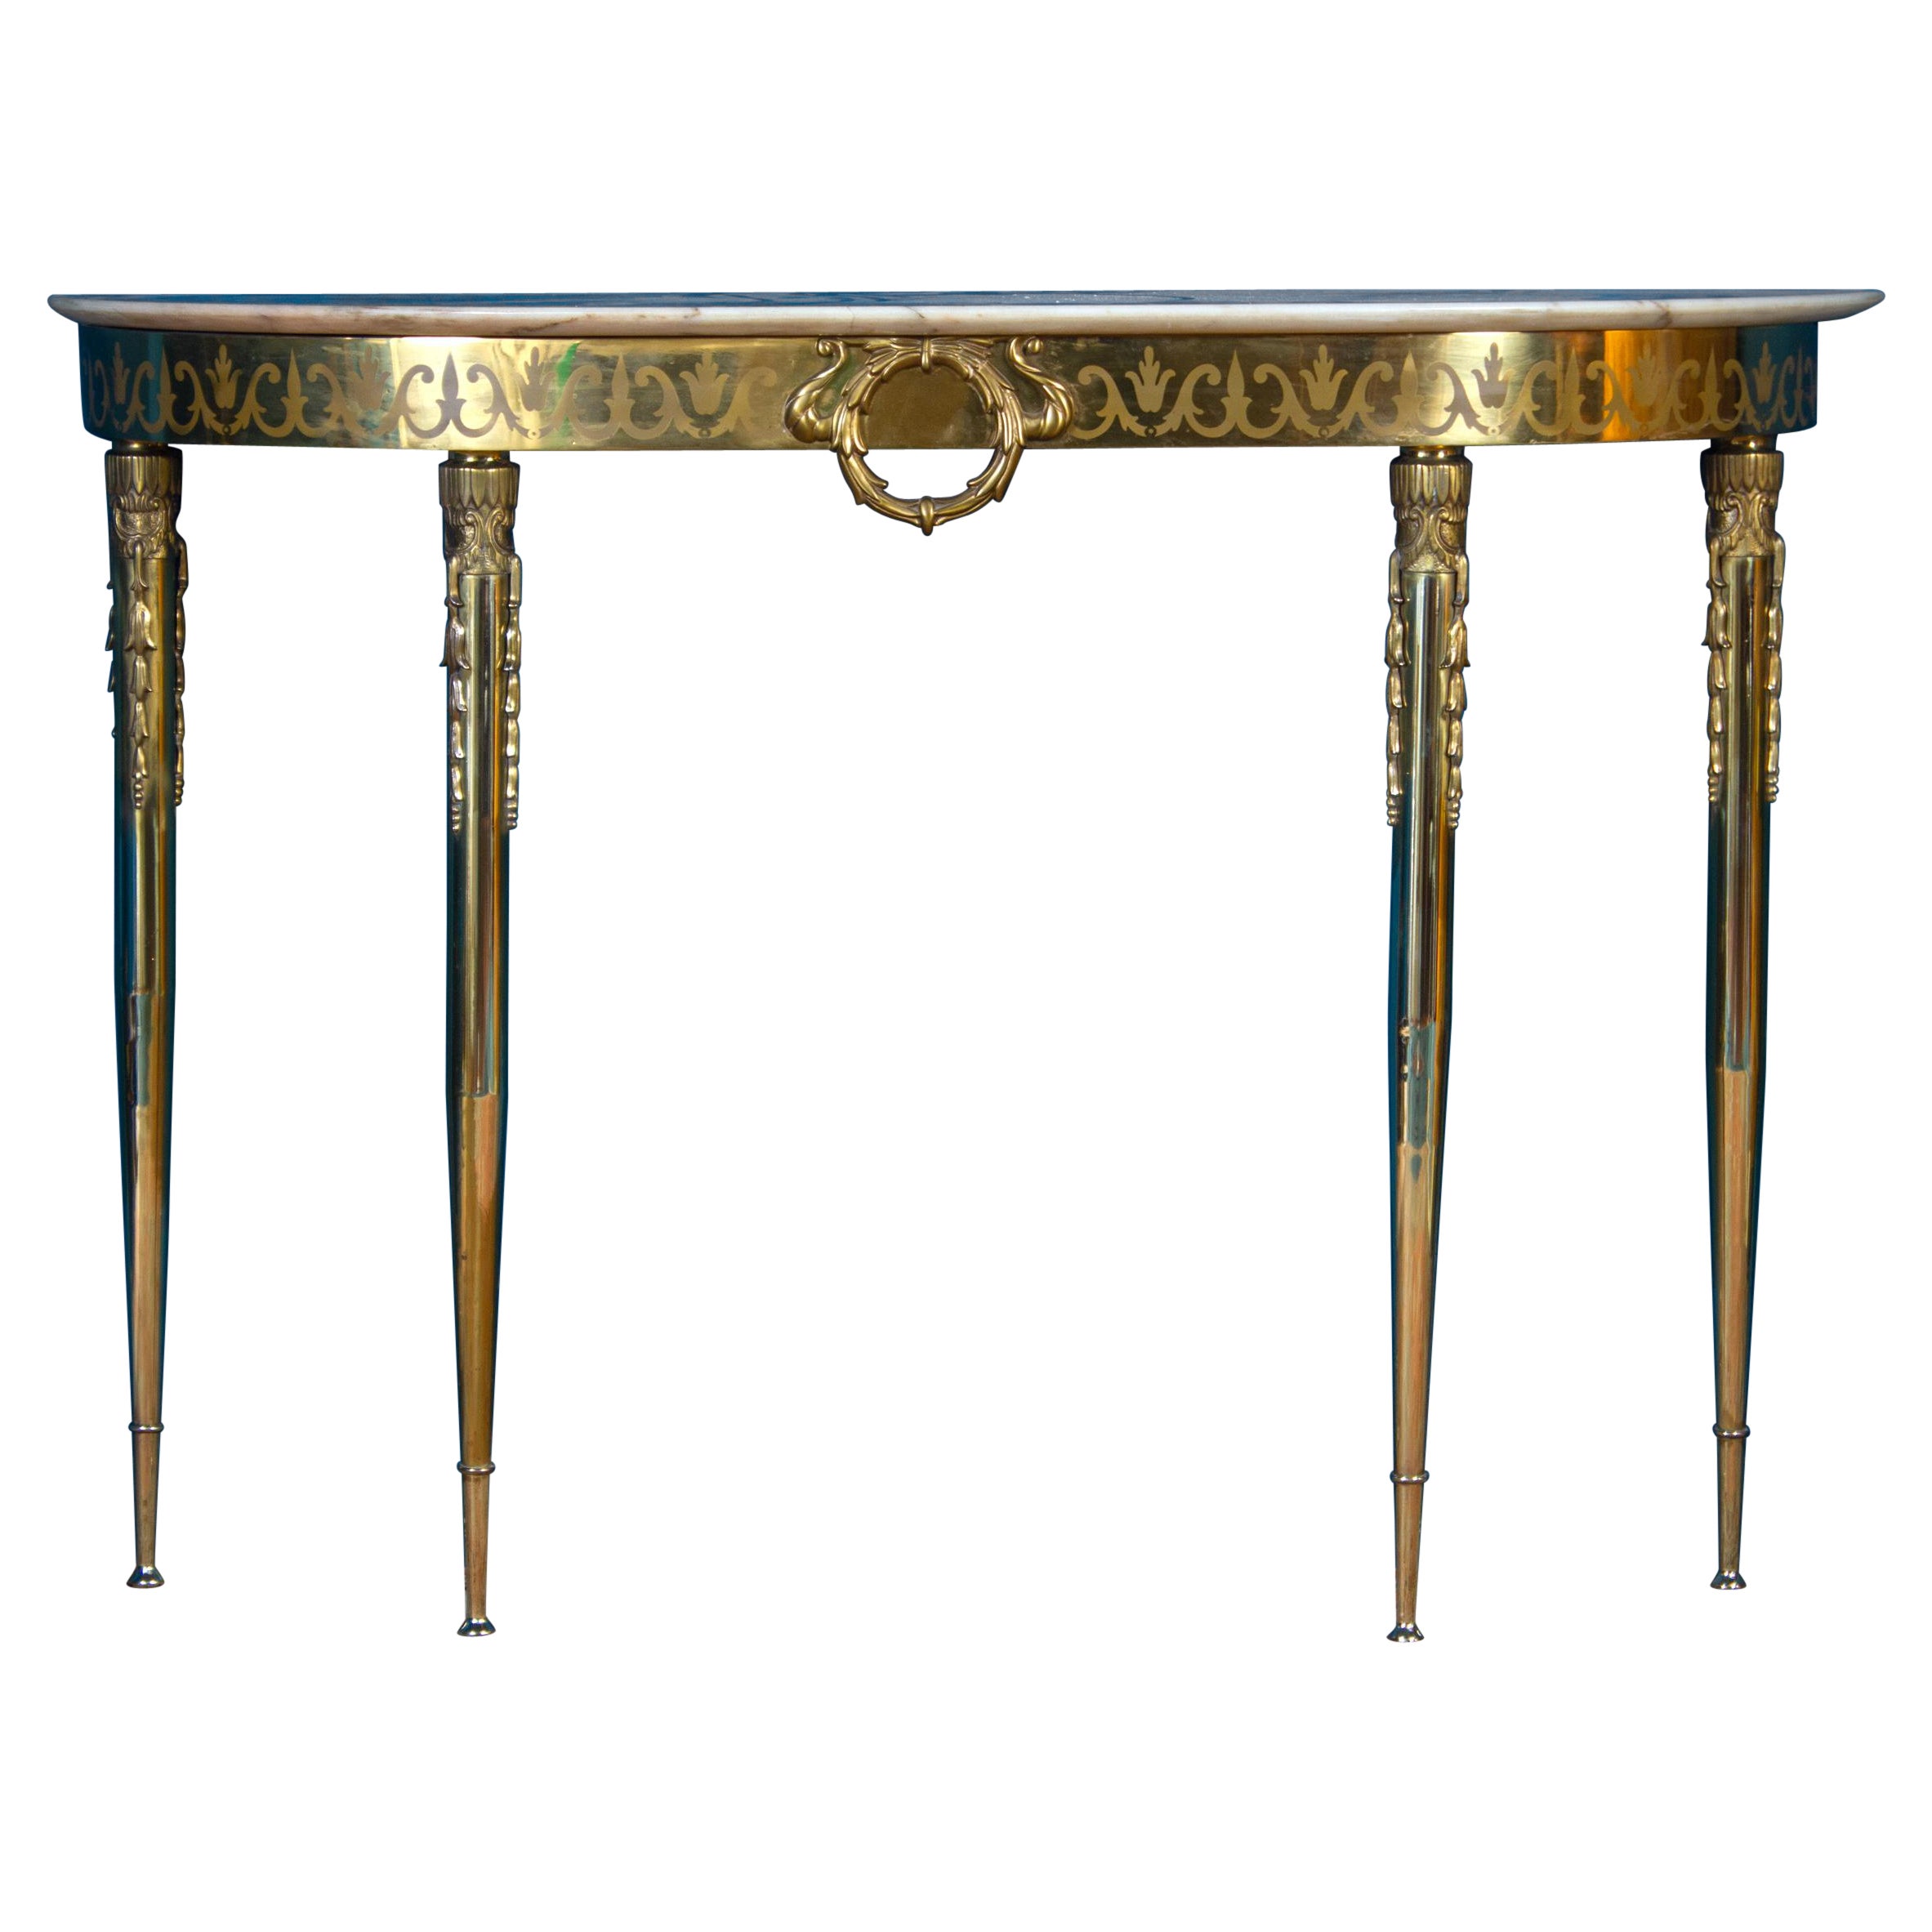 Midcentury Oval Shaped Brass Console Table Italy, 1950 For Sale